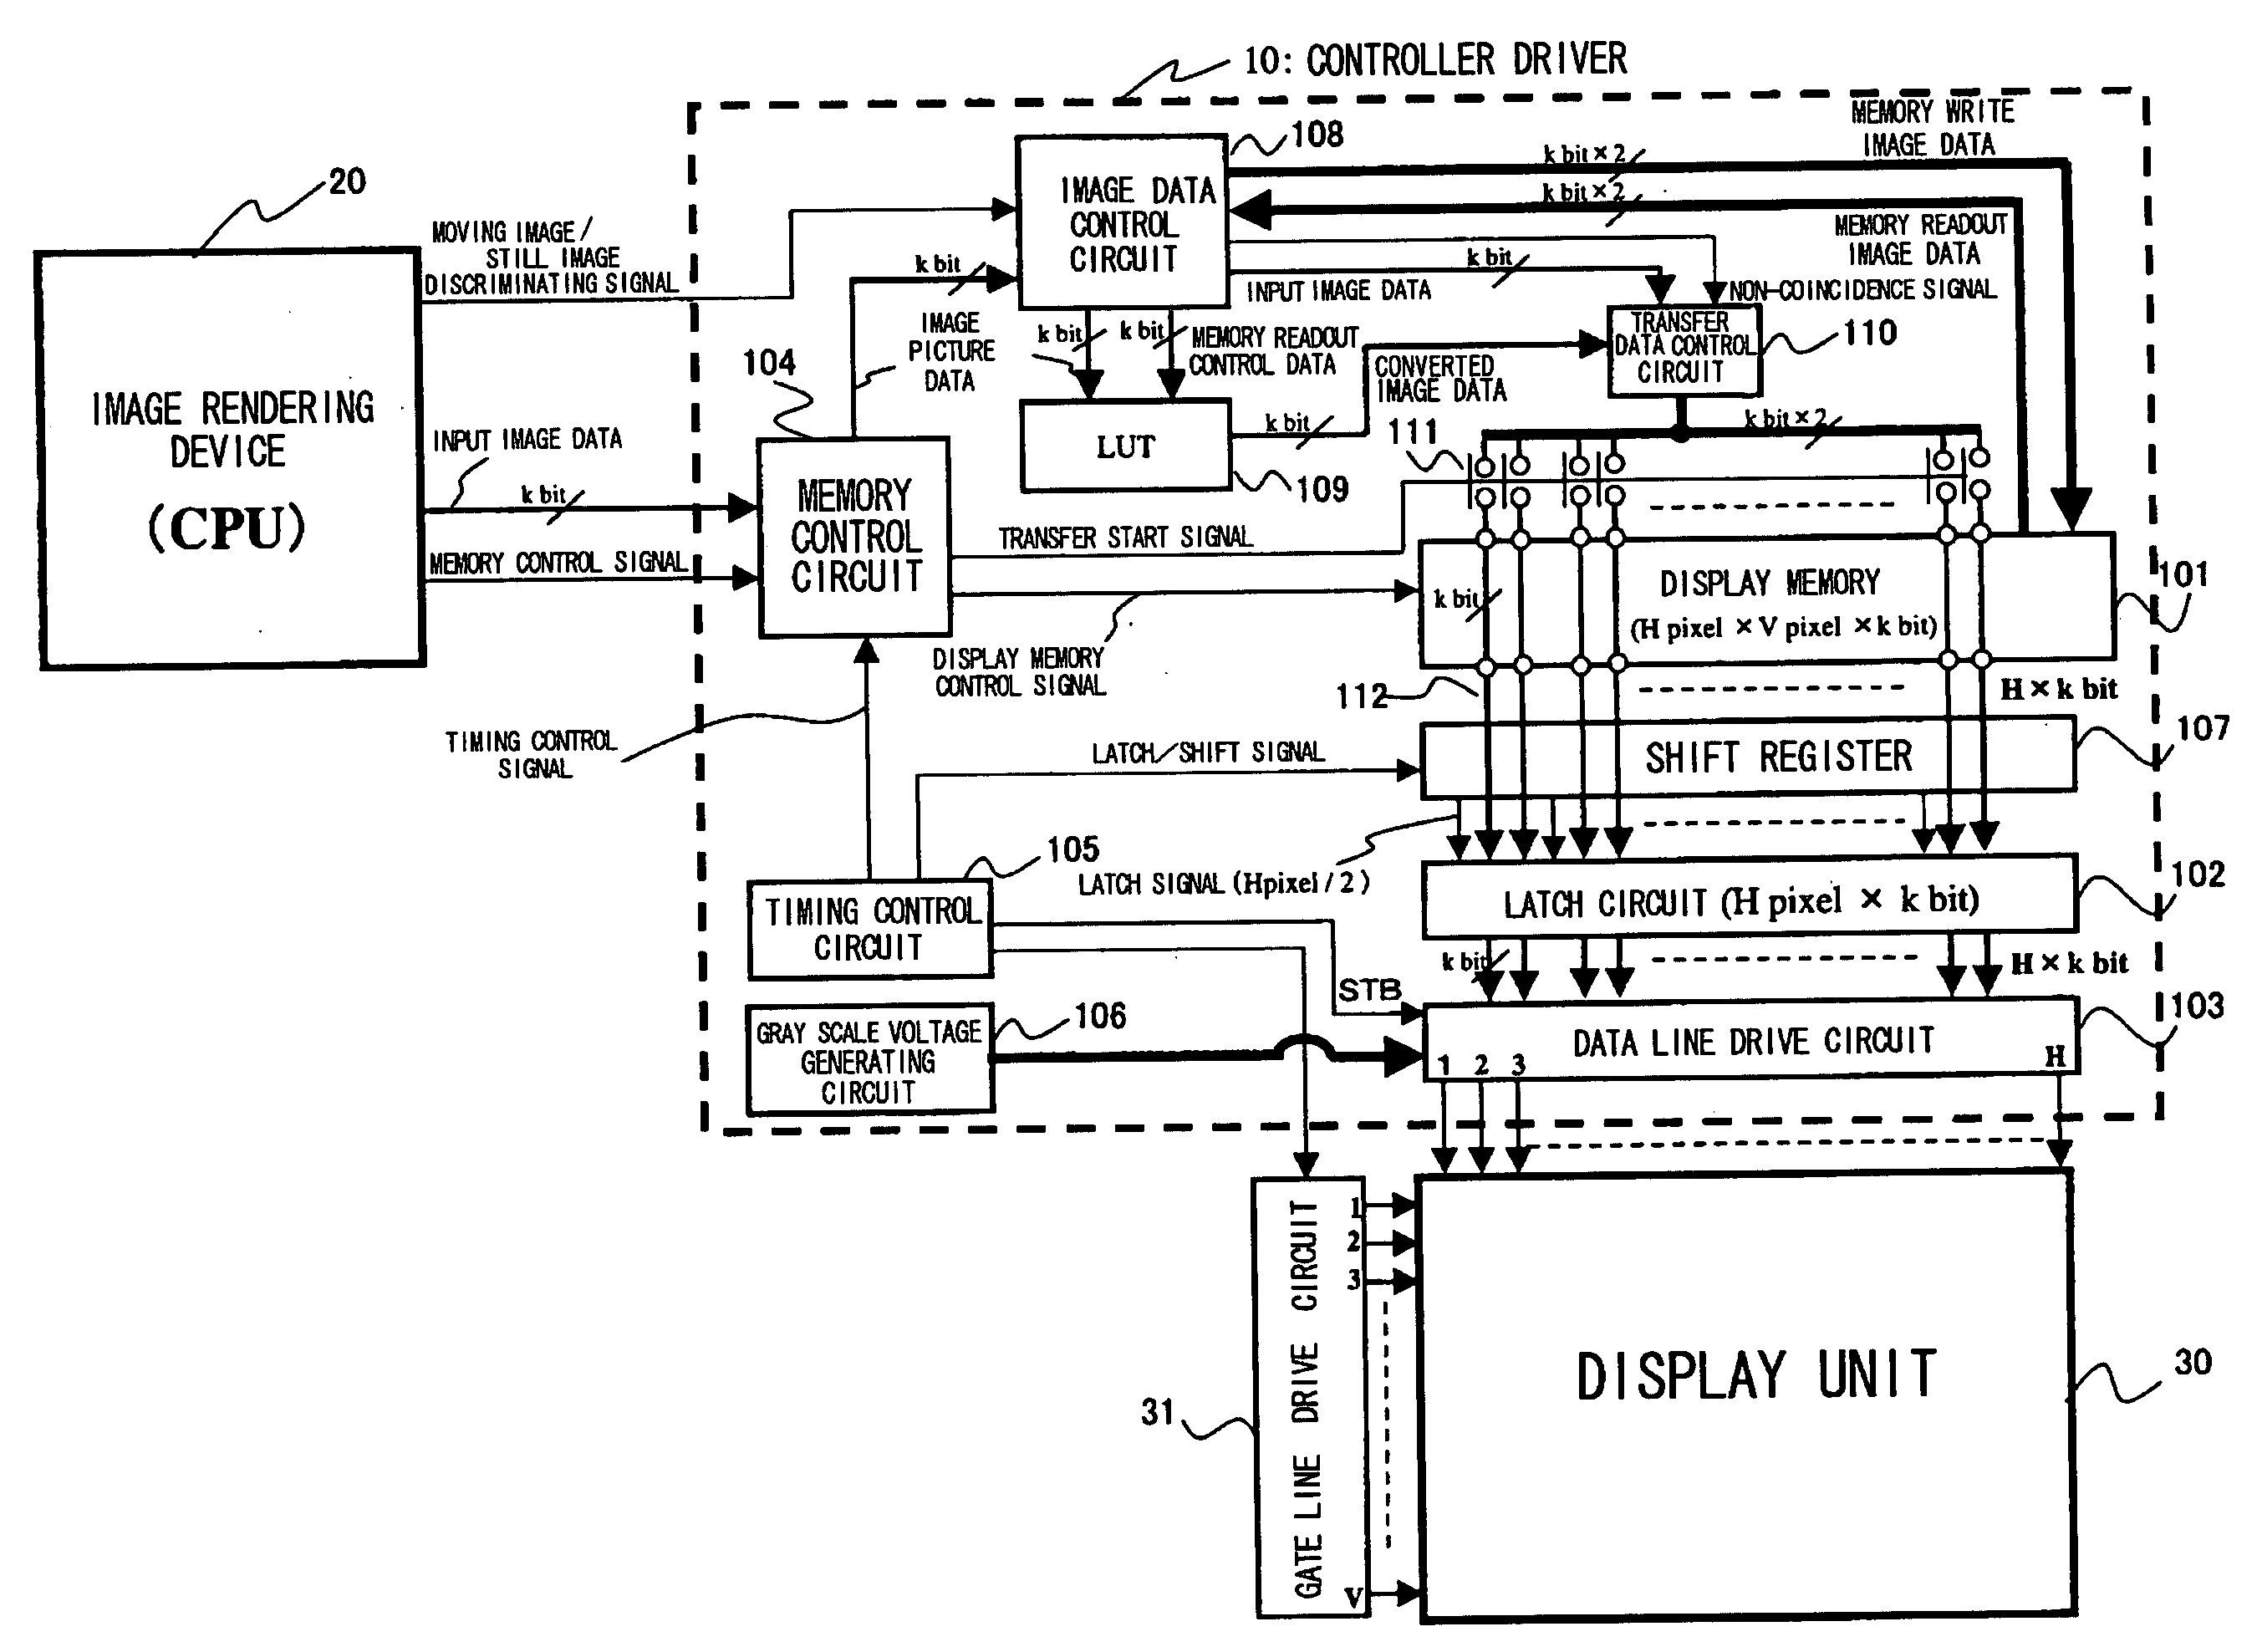 Controller driver and display apparatus